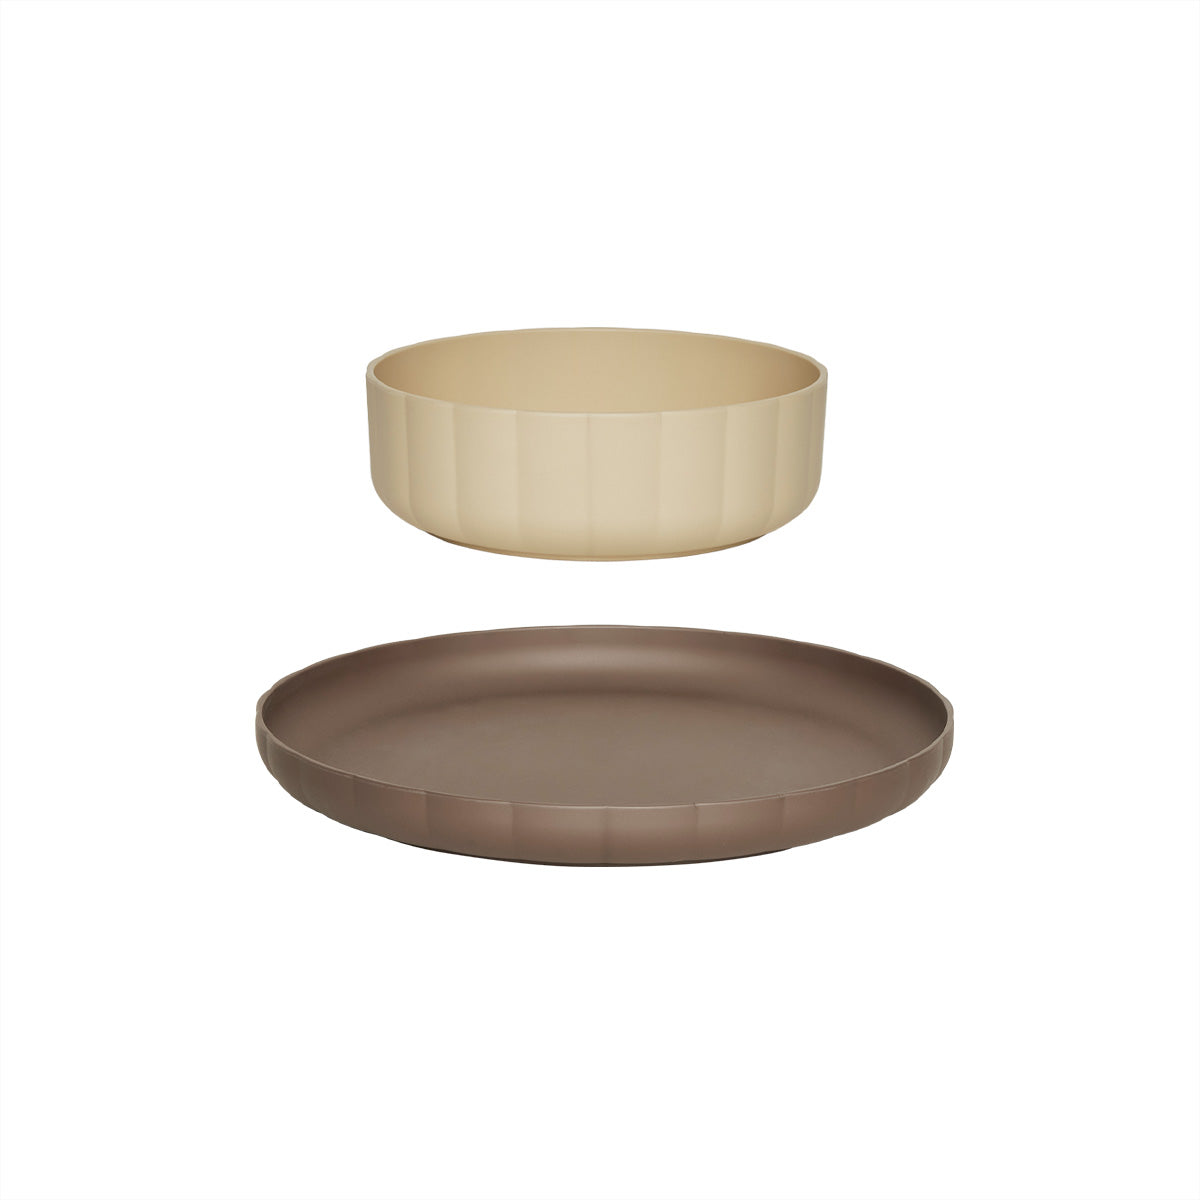 OYOY MINI Pullo Plate & Bowl - Set of 2 Dining Ware 312 Taupe / Vanilla